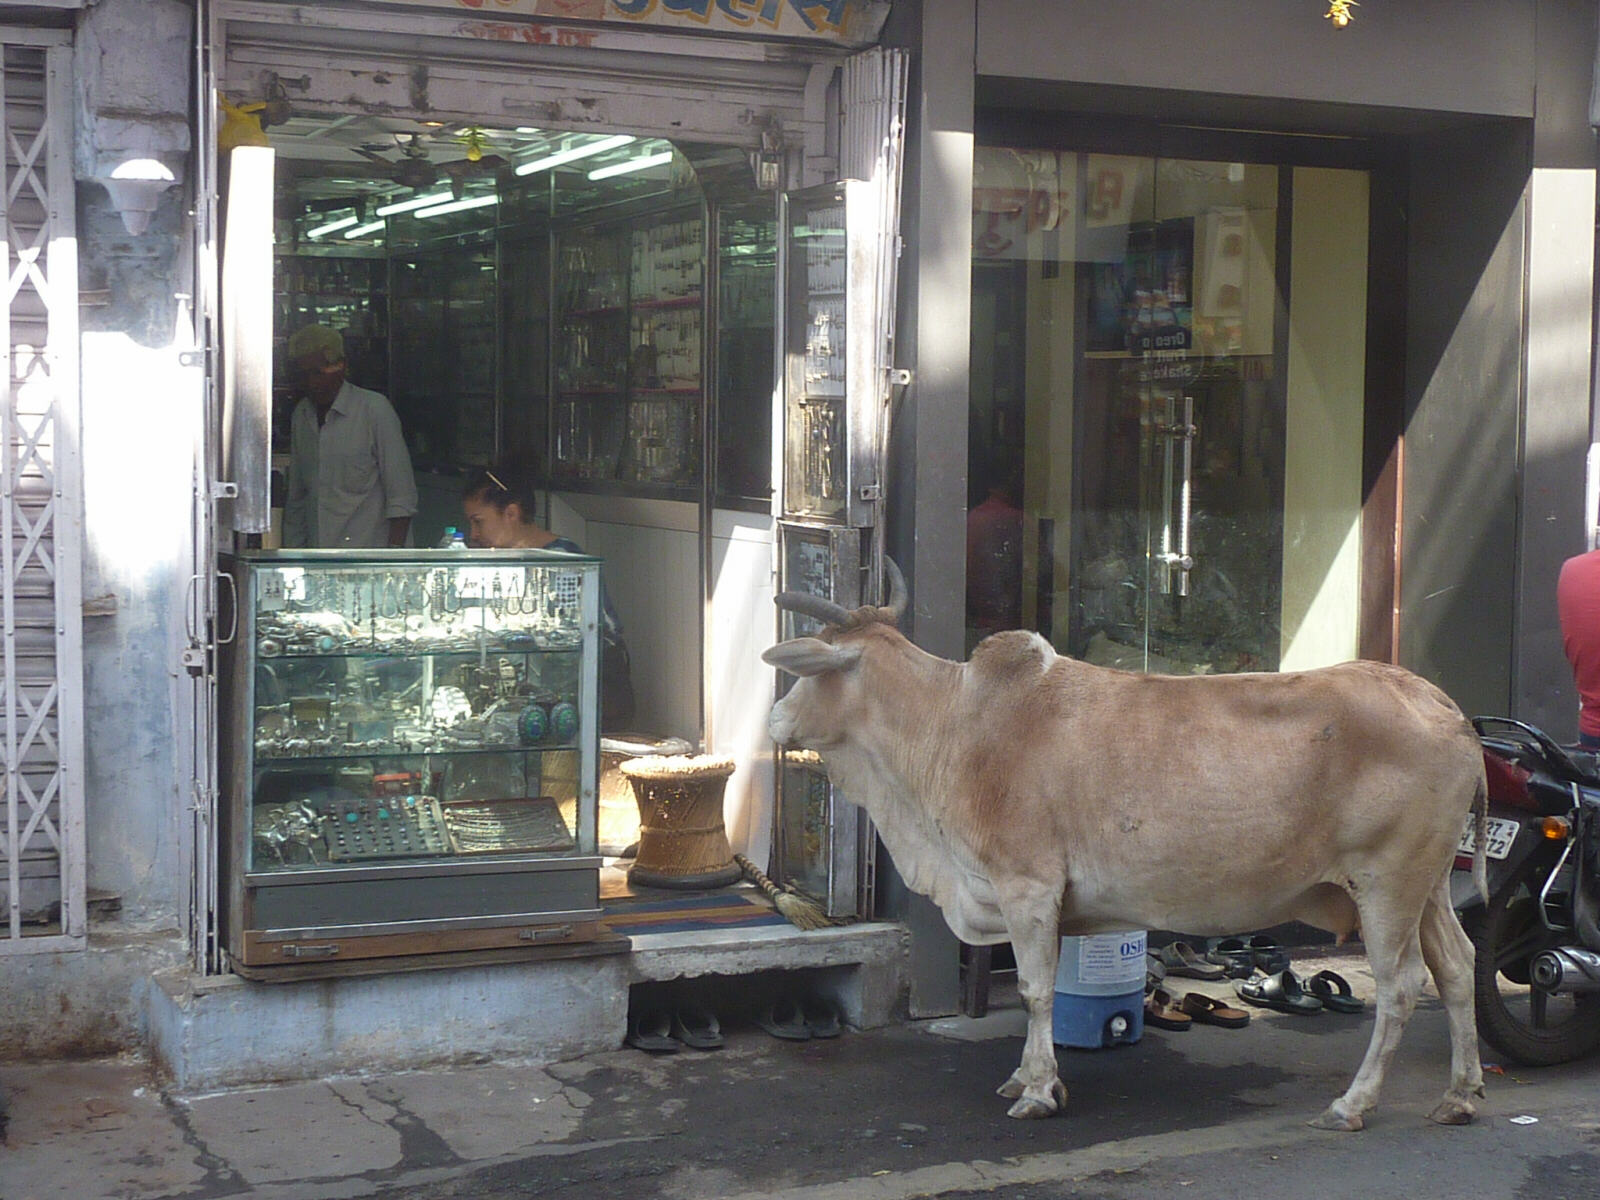 A cow browsing a jeweller's shop window, Udaipur